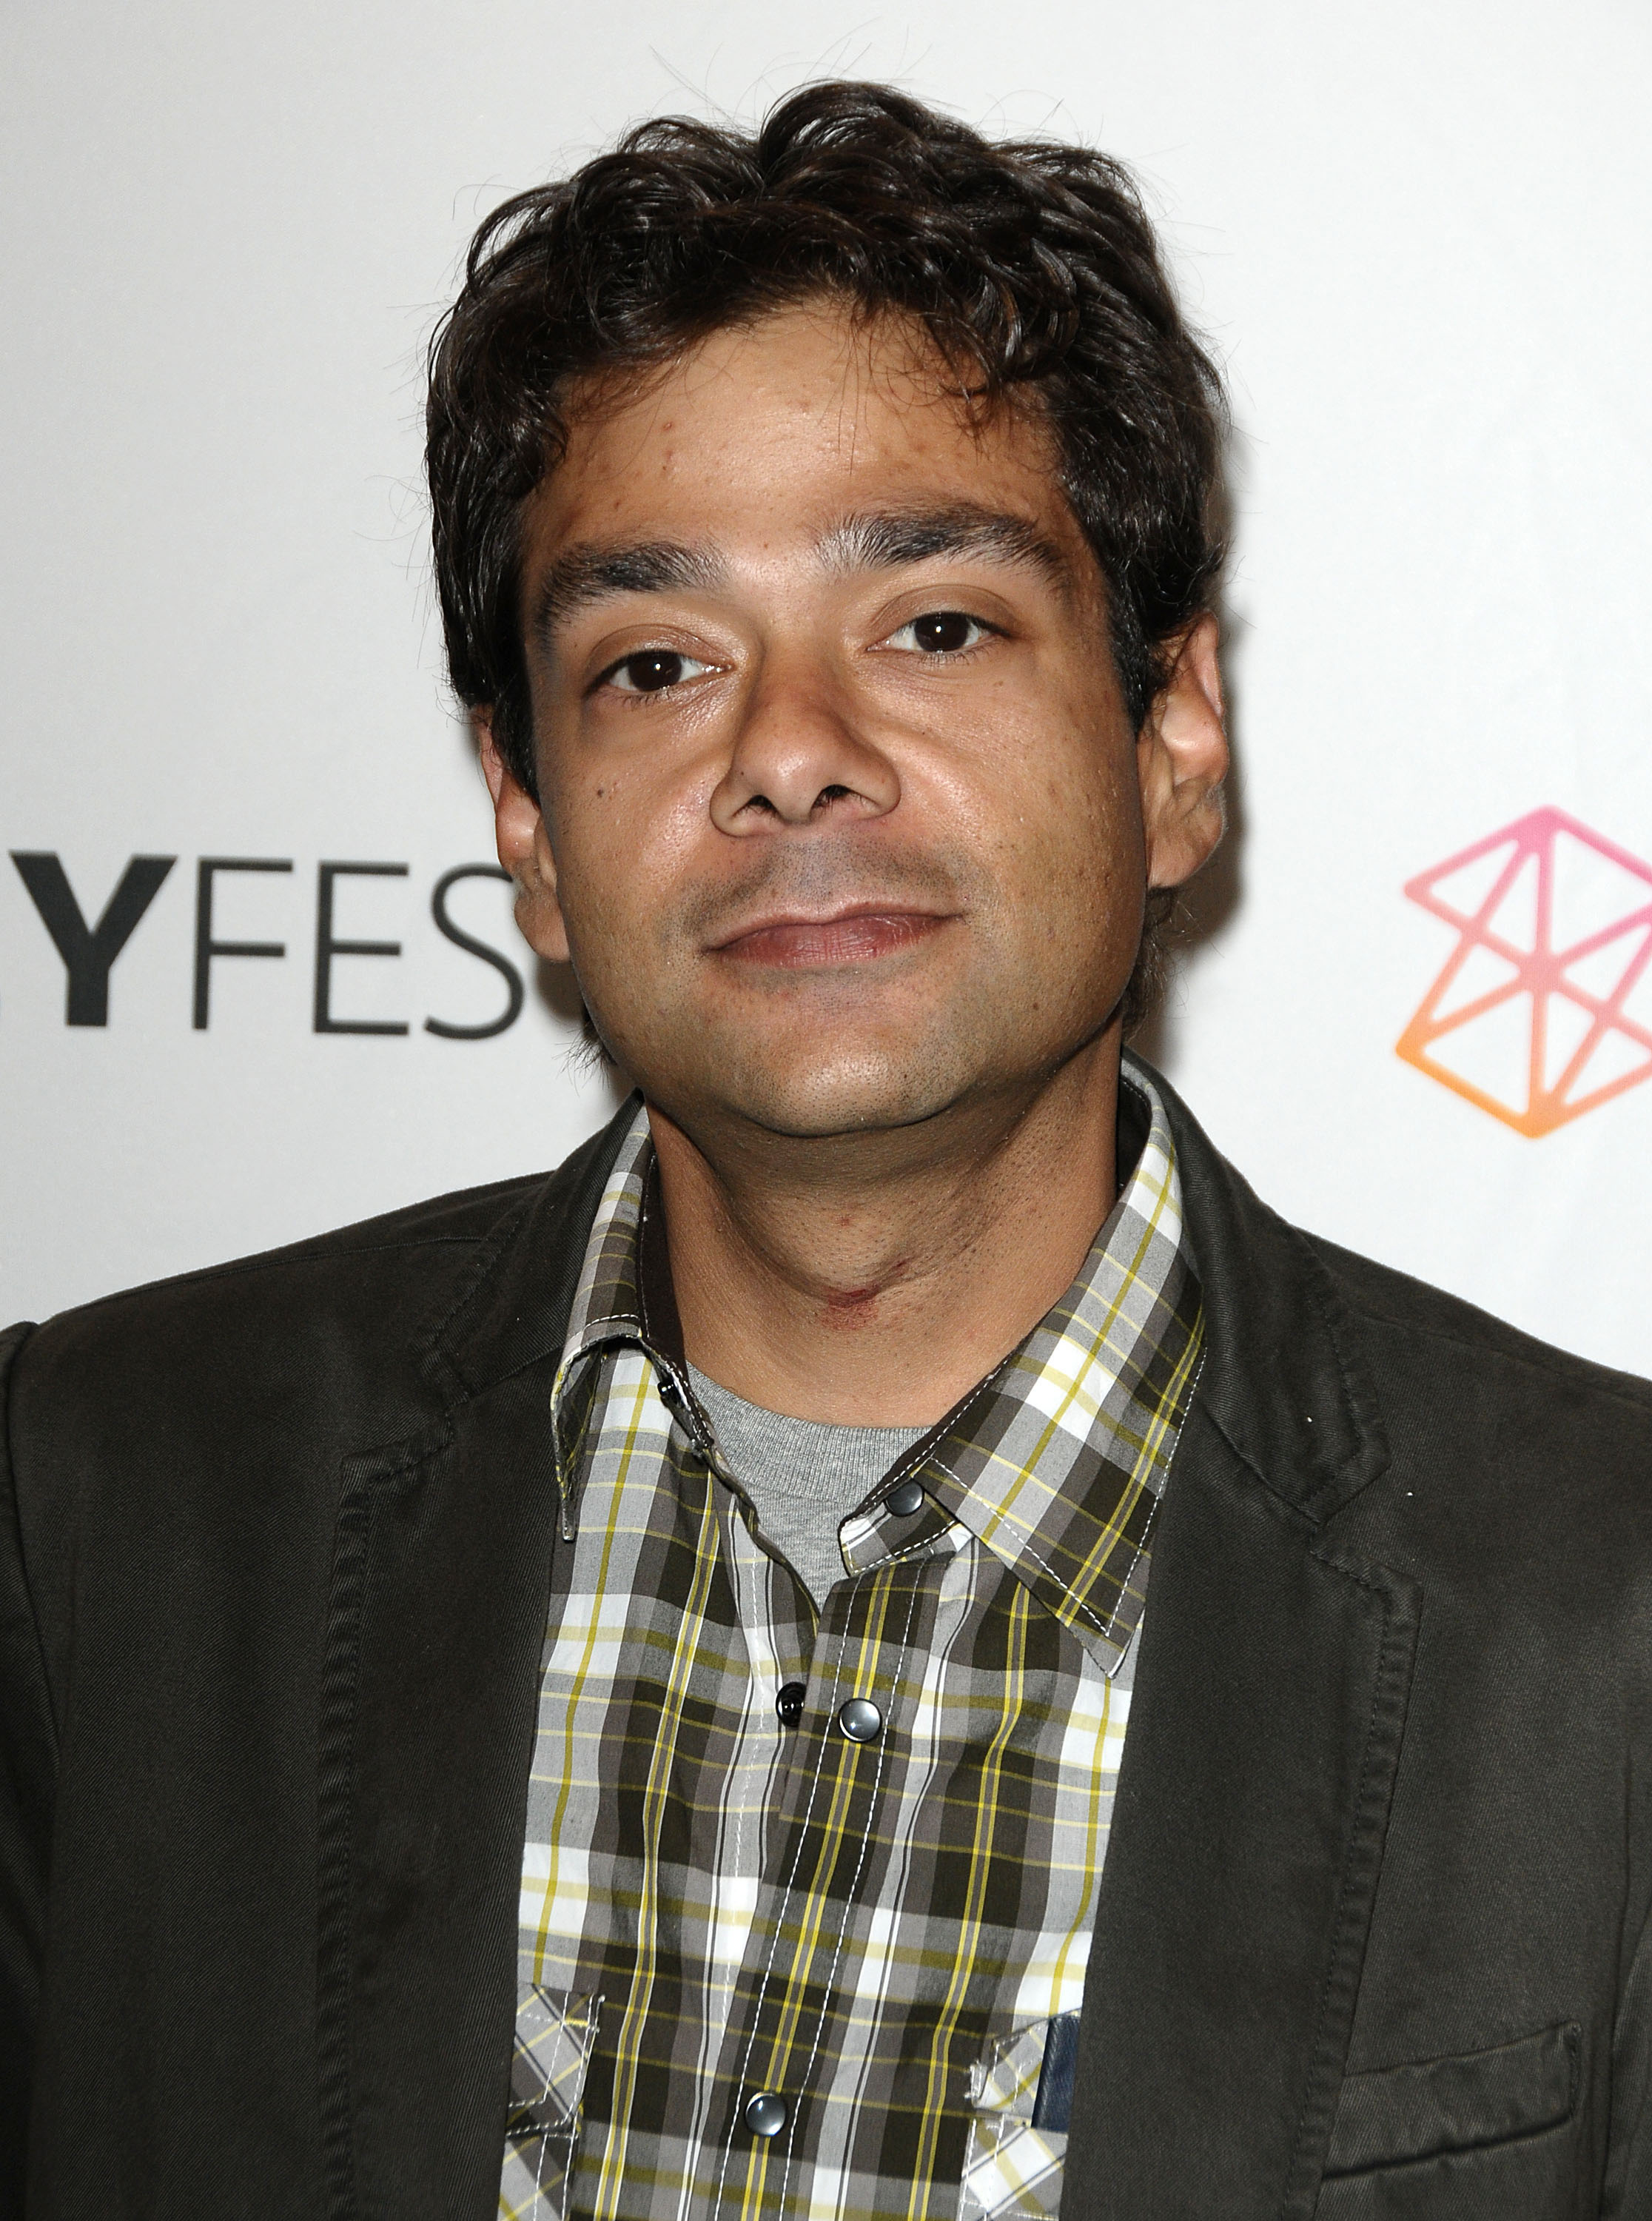 Shaun Weiss attends the "Freaks & Geeks/Undeclared" event at PaleyFest 2011 at Saban Theatre on March 12, 2011. | Source: Getty Images